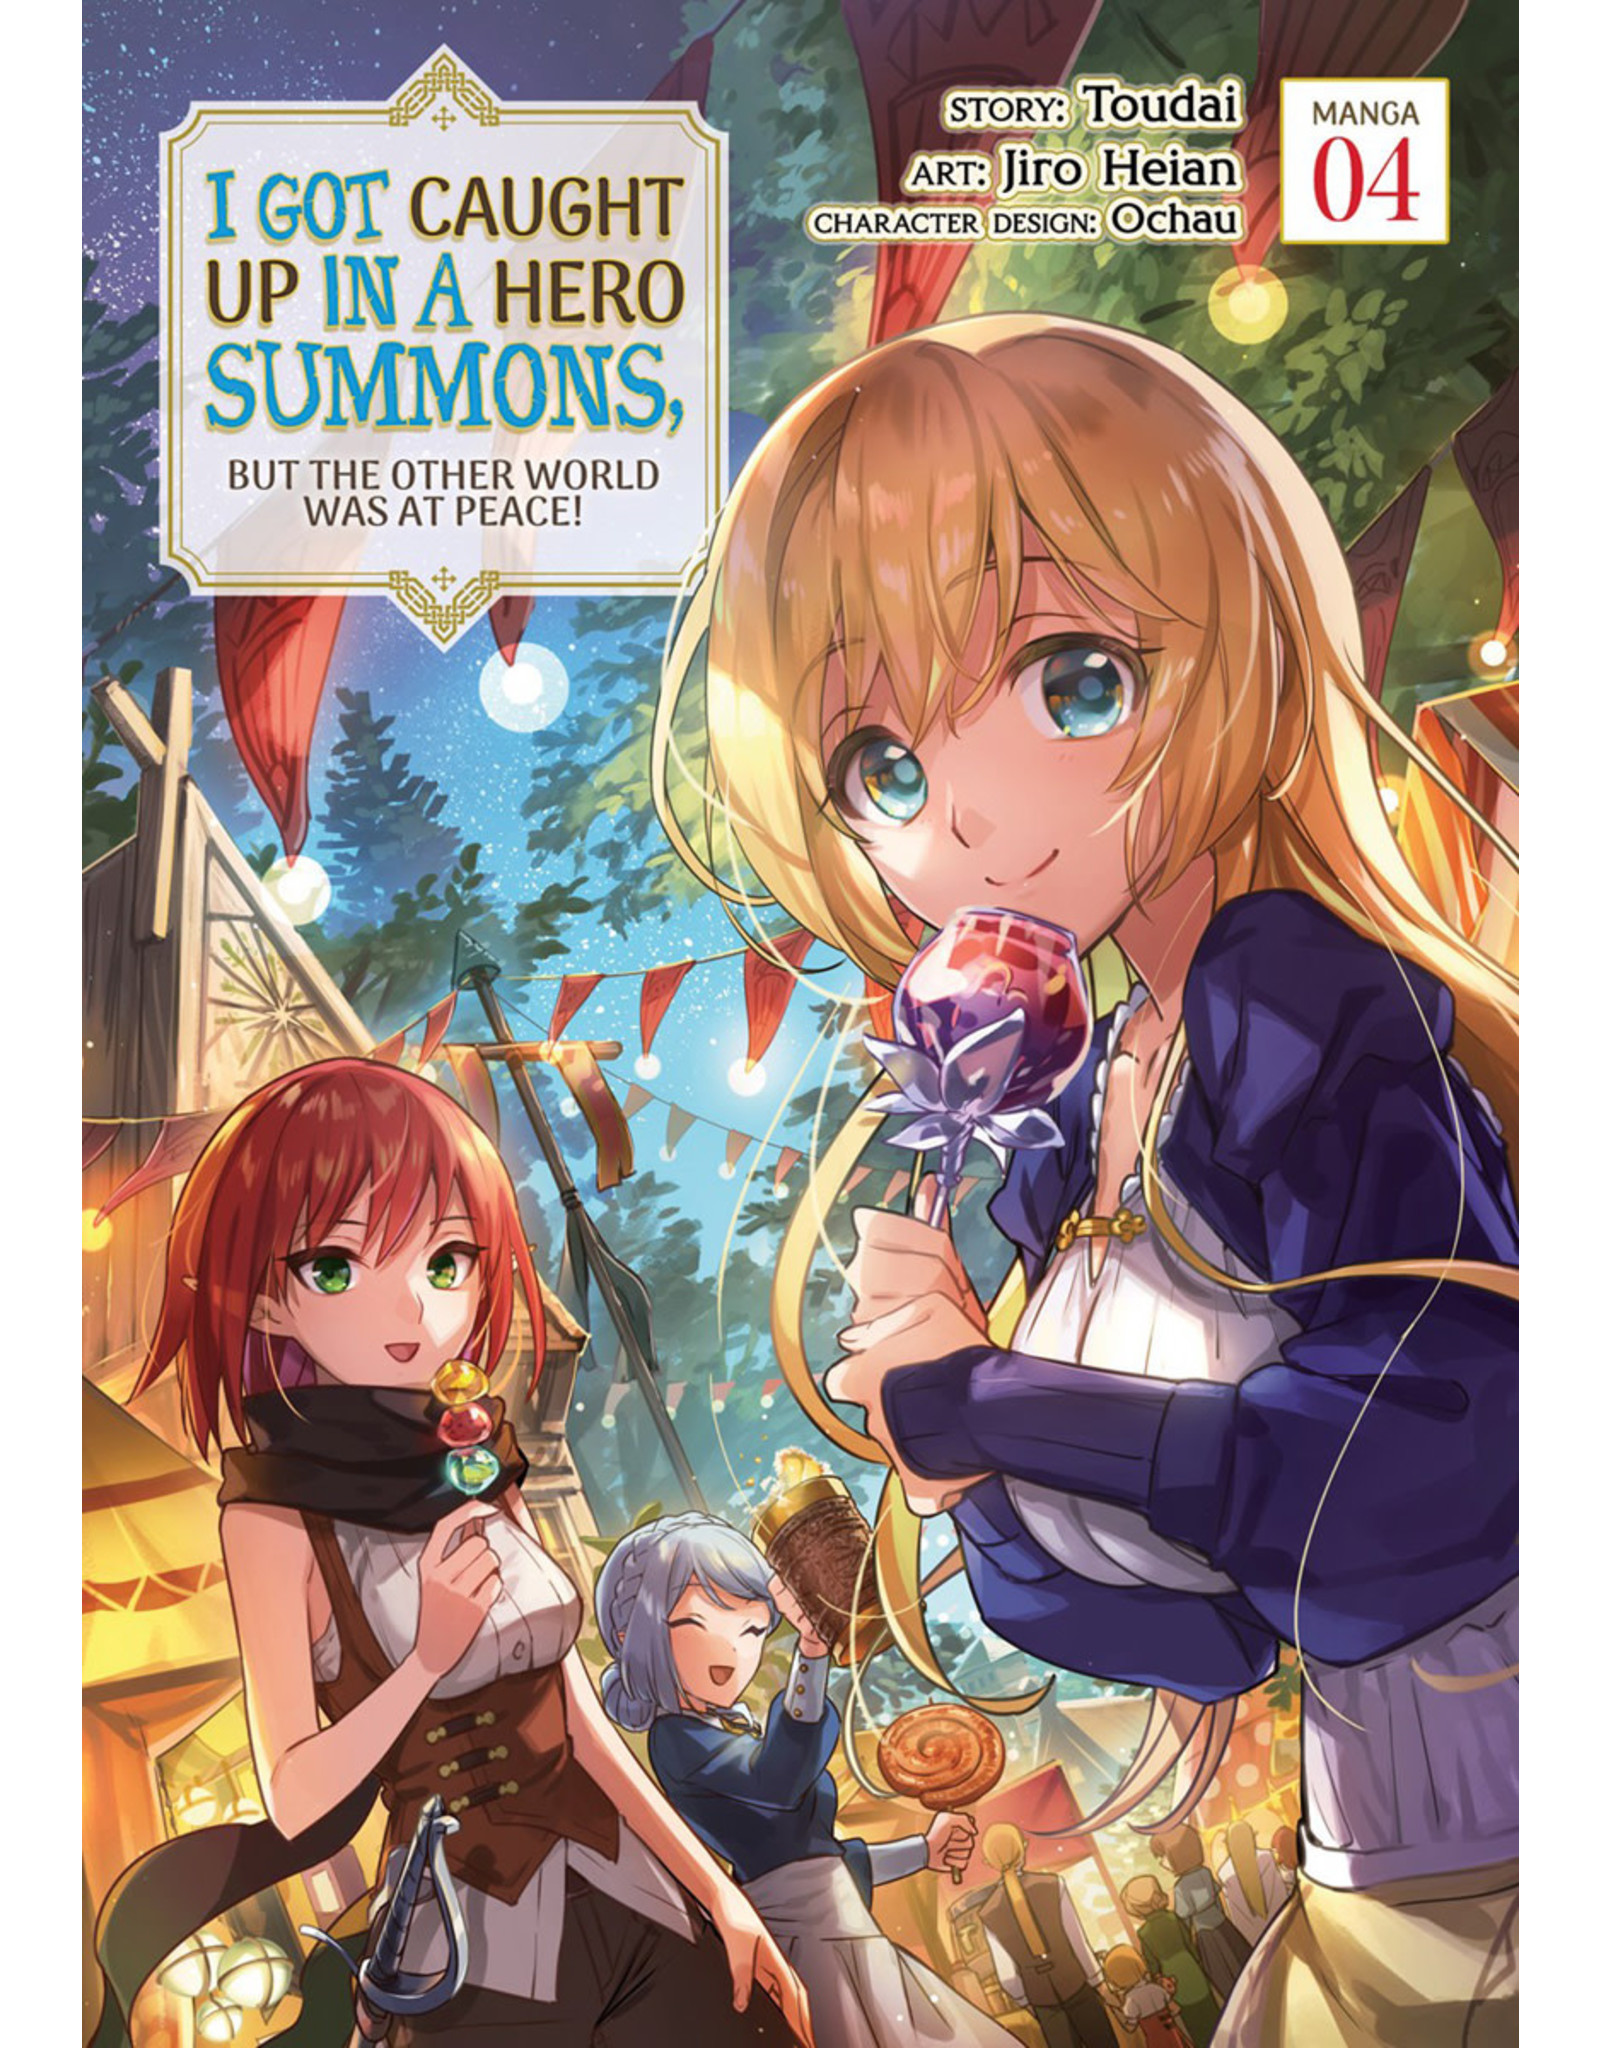 I Got Caught Up In A Hero Summons, But The Other World Was At Peace! 04 (English) - Manga